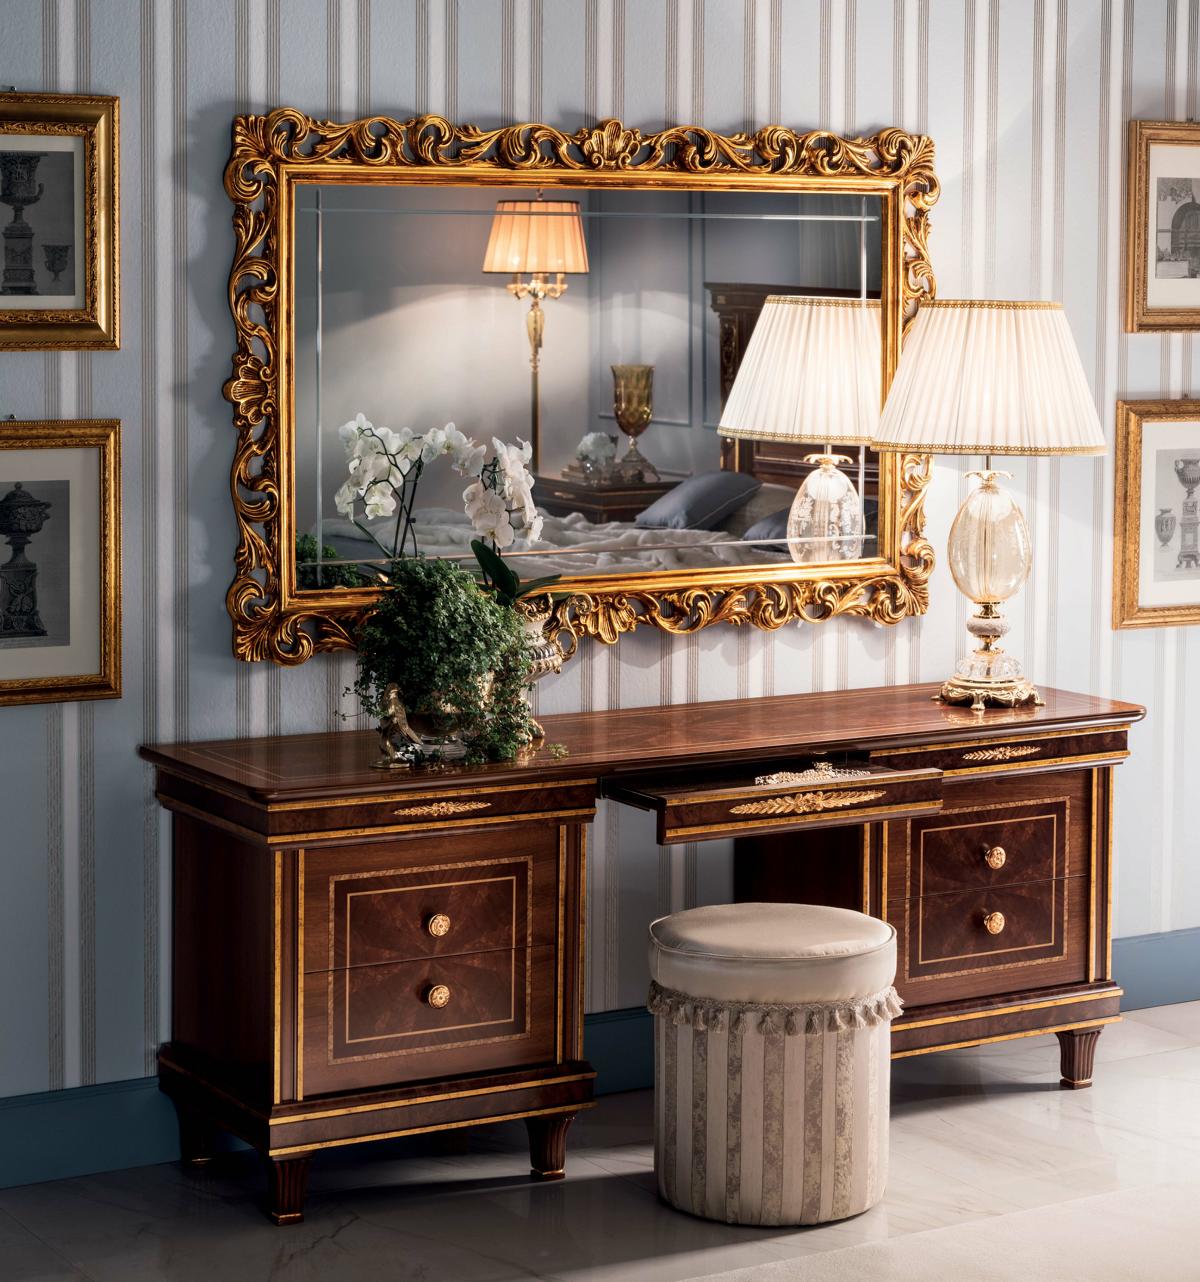 Bedroom set of dressing table with drawers, mirror & stool in antique style italian furniture arredoclassic™